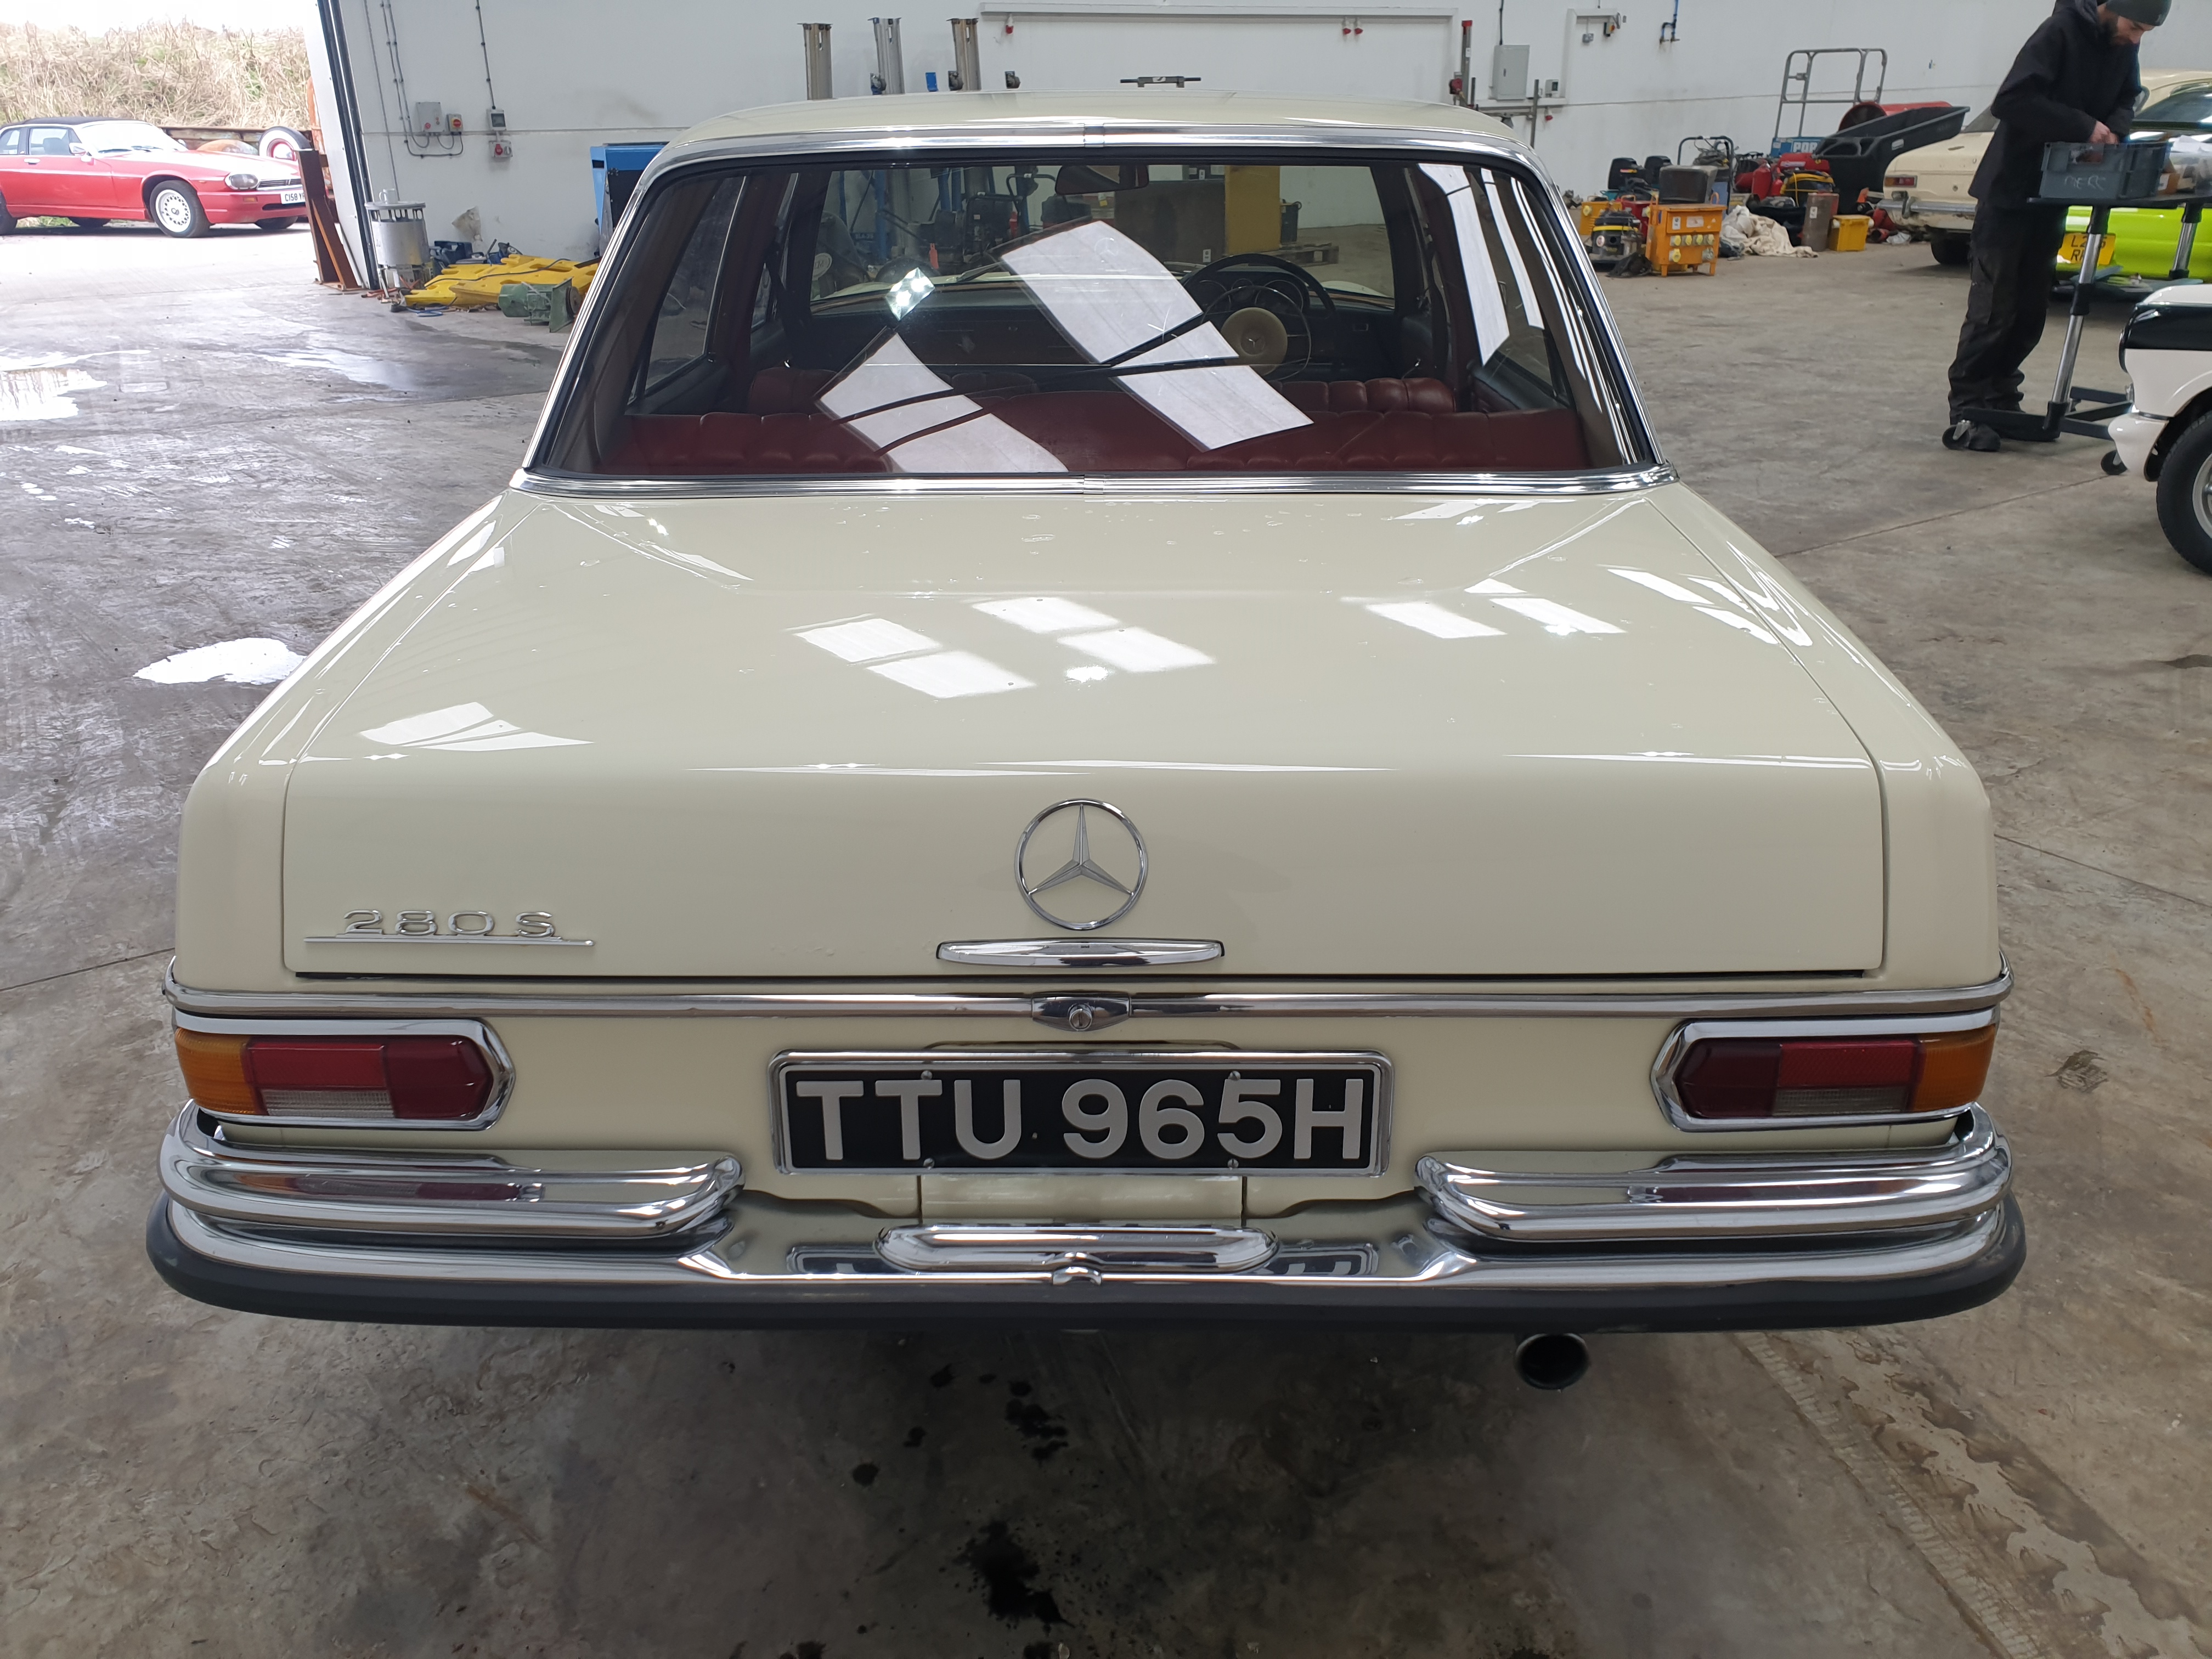 1970 Mercedes 280S - Image 4 of 17